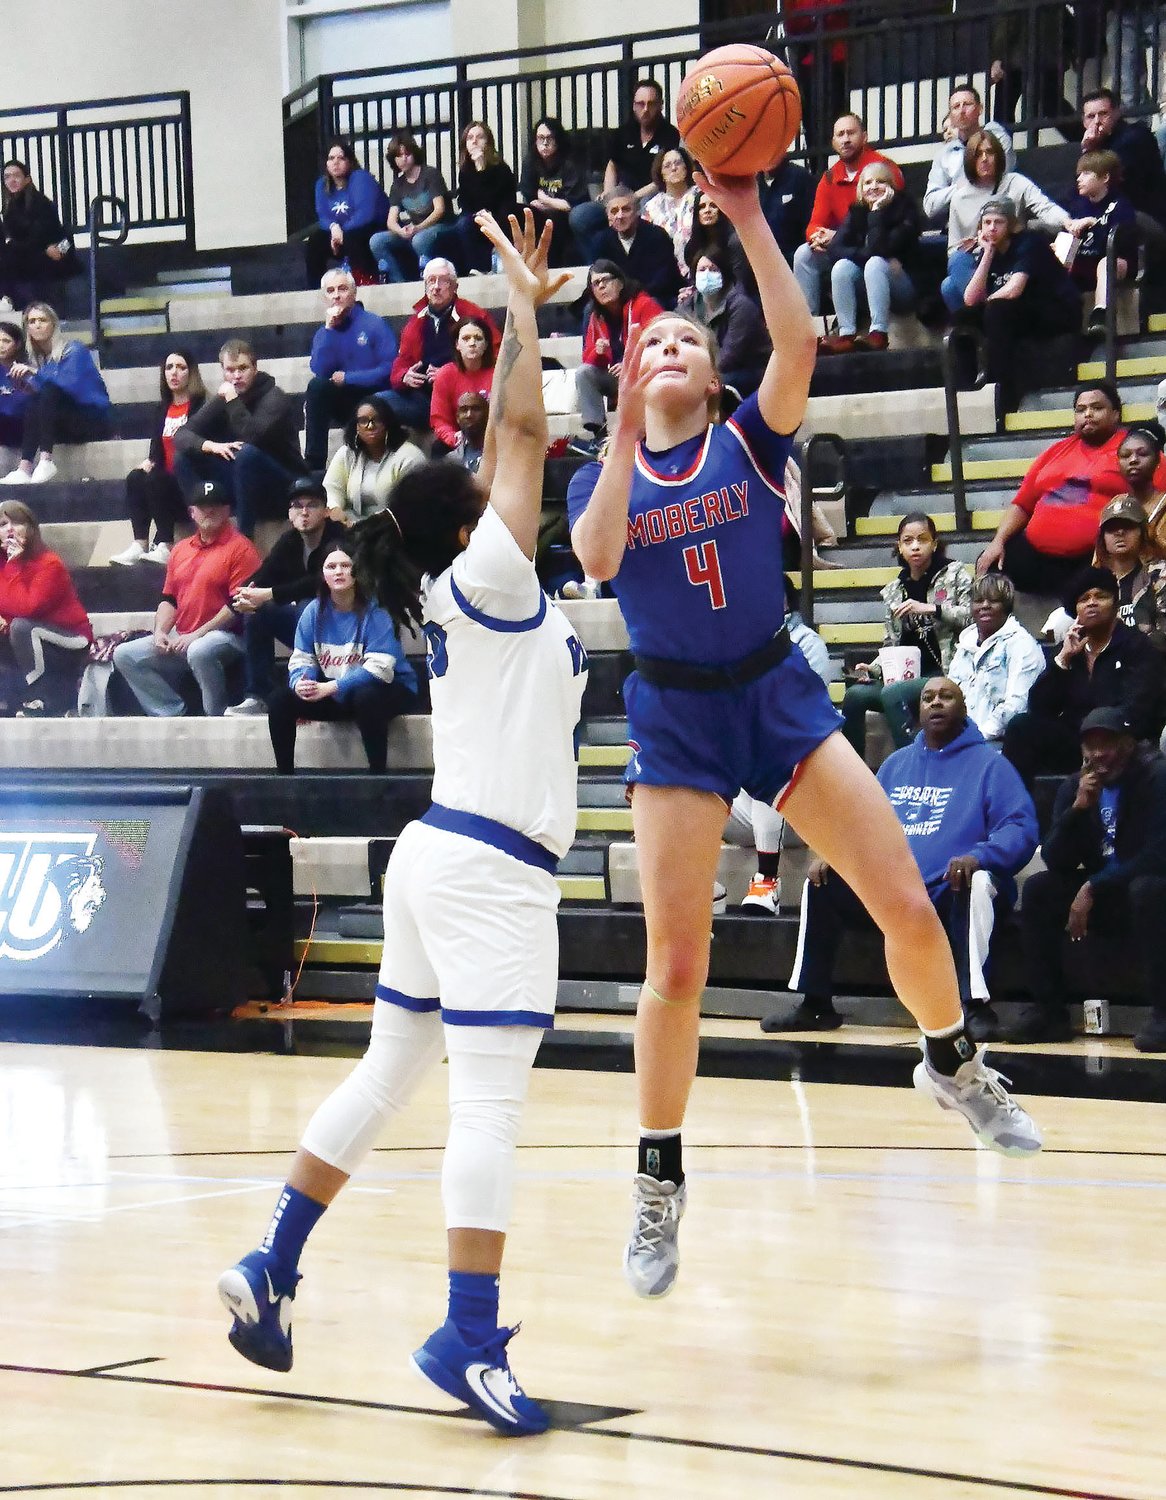 Moberly girls basketball player Asa Fanning (4) attempts a shot during Saturday's Class 4 state quarterfinal game at Lindenwood University's Hyland Arena.